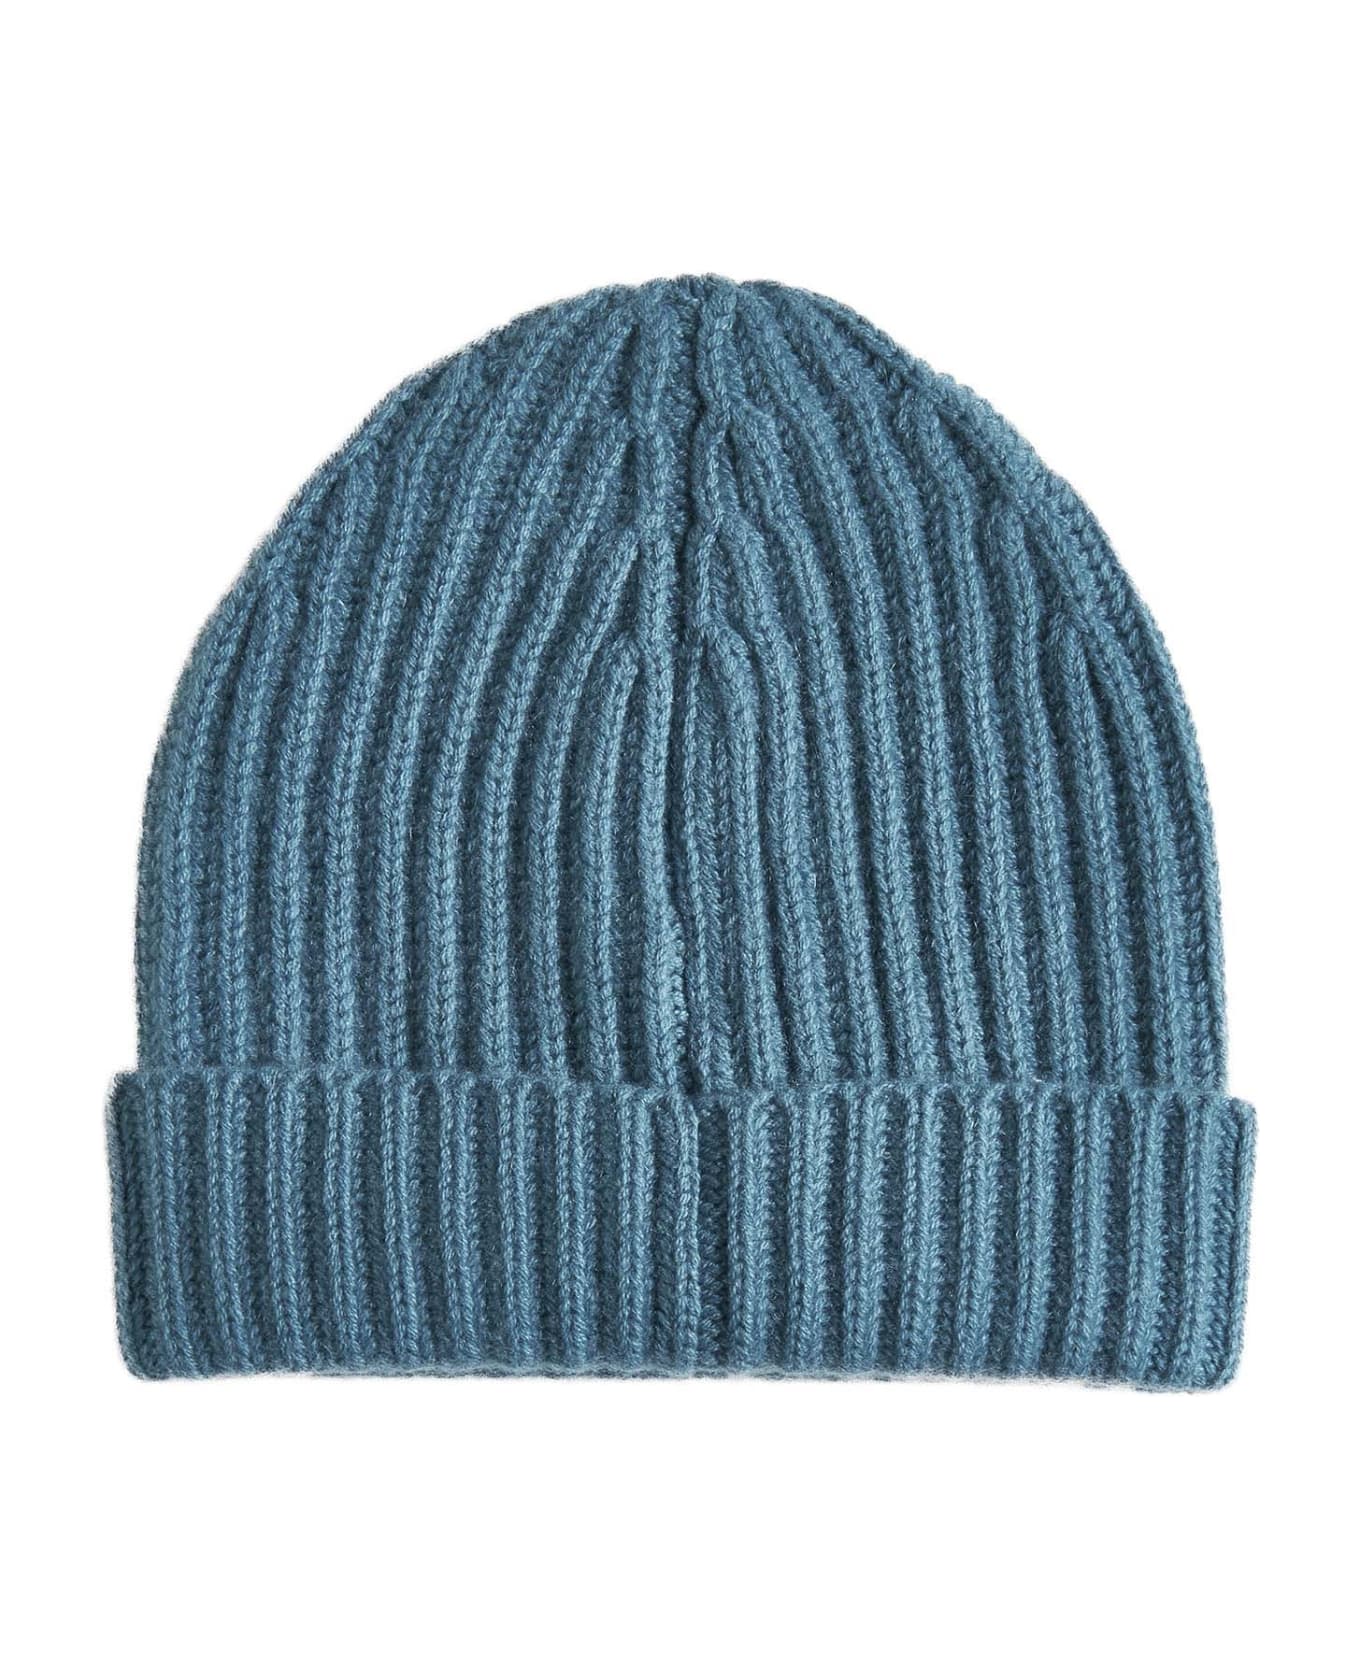 Malo Hat - Teal green